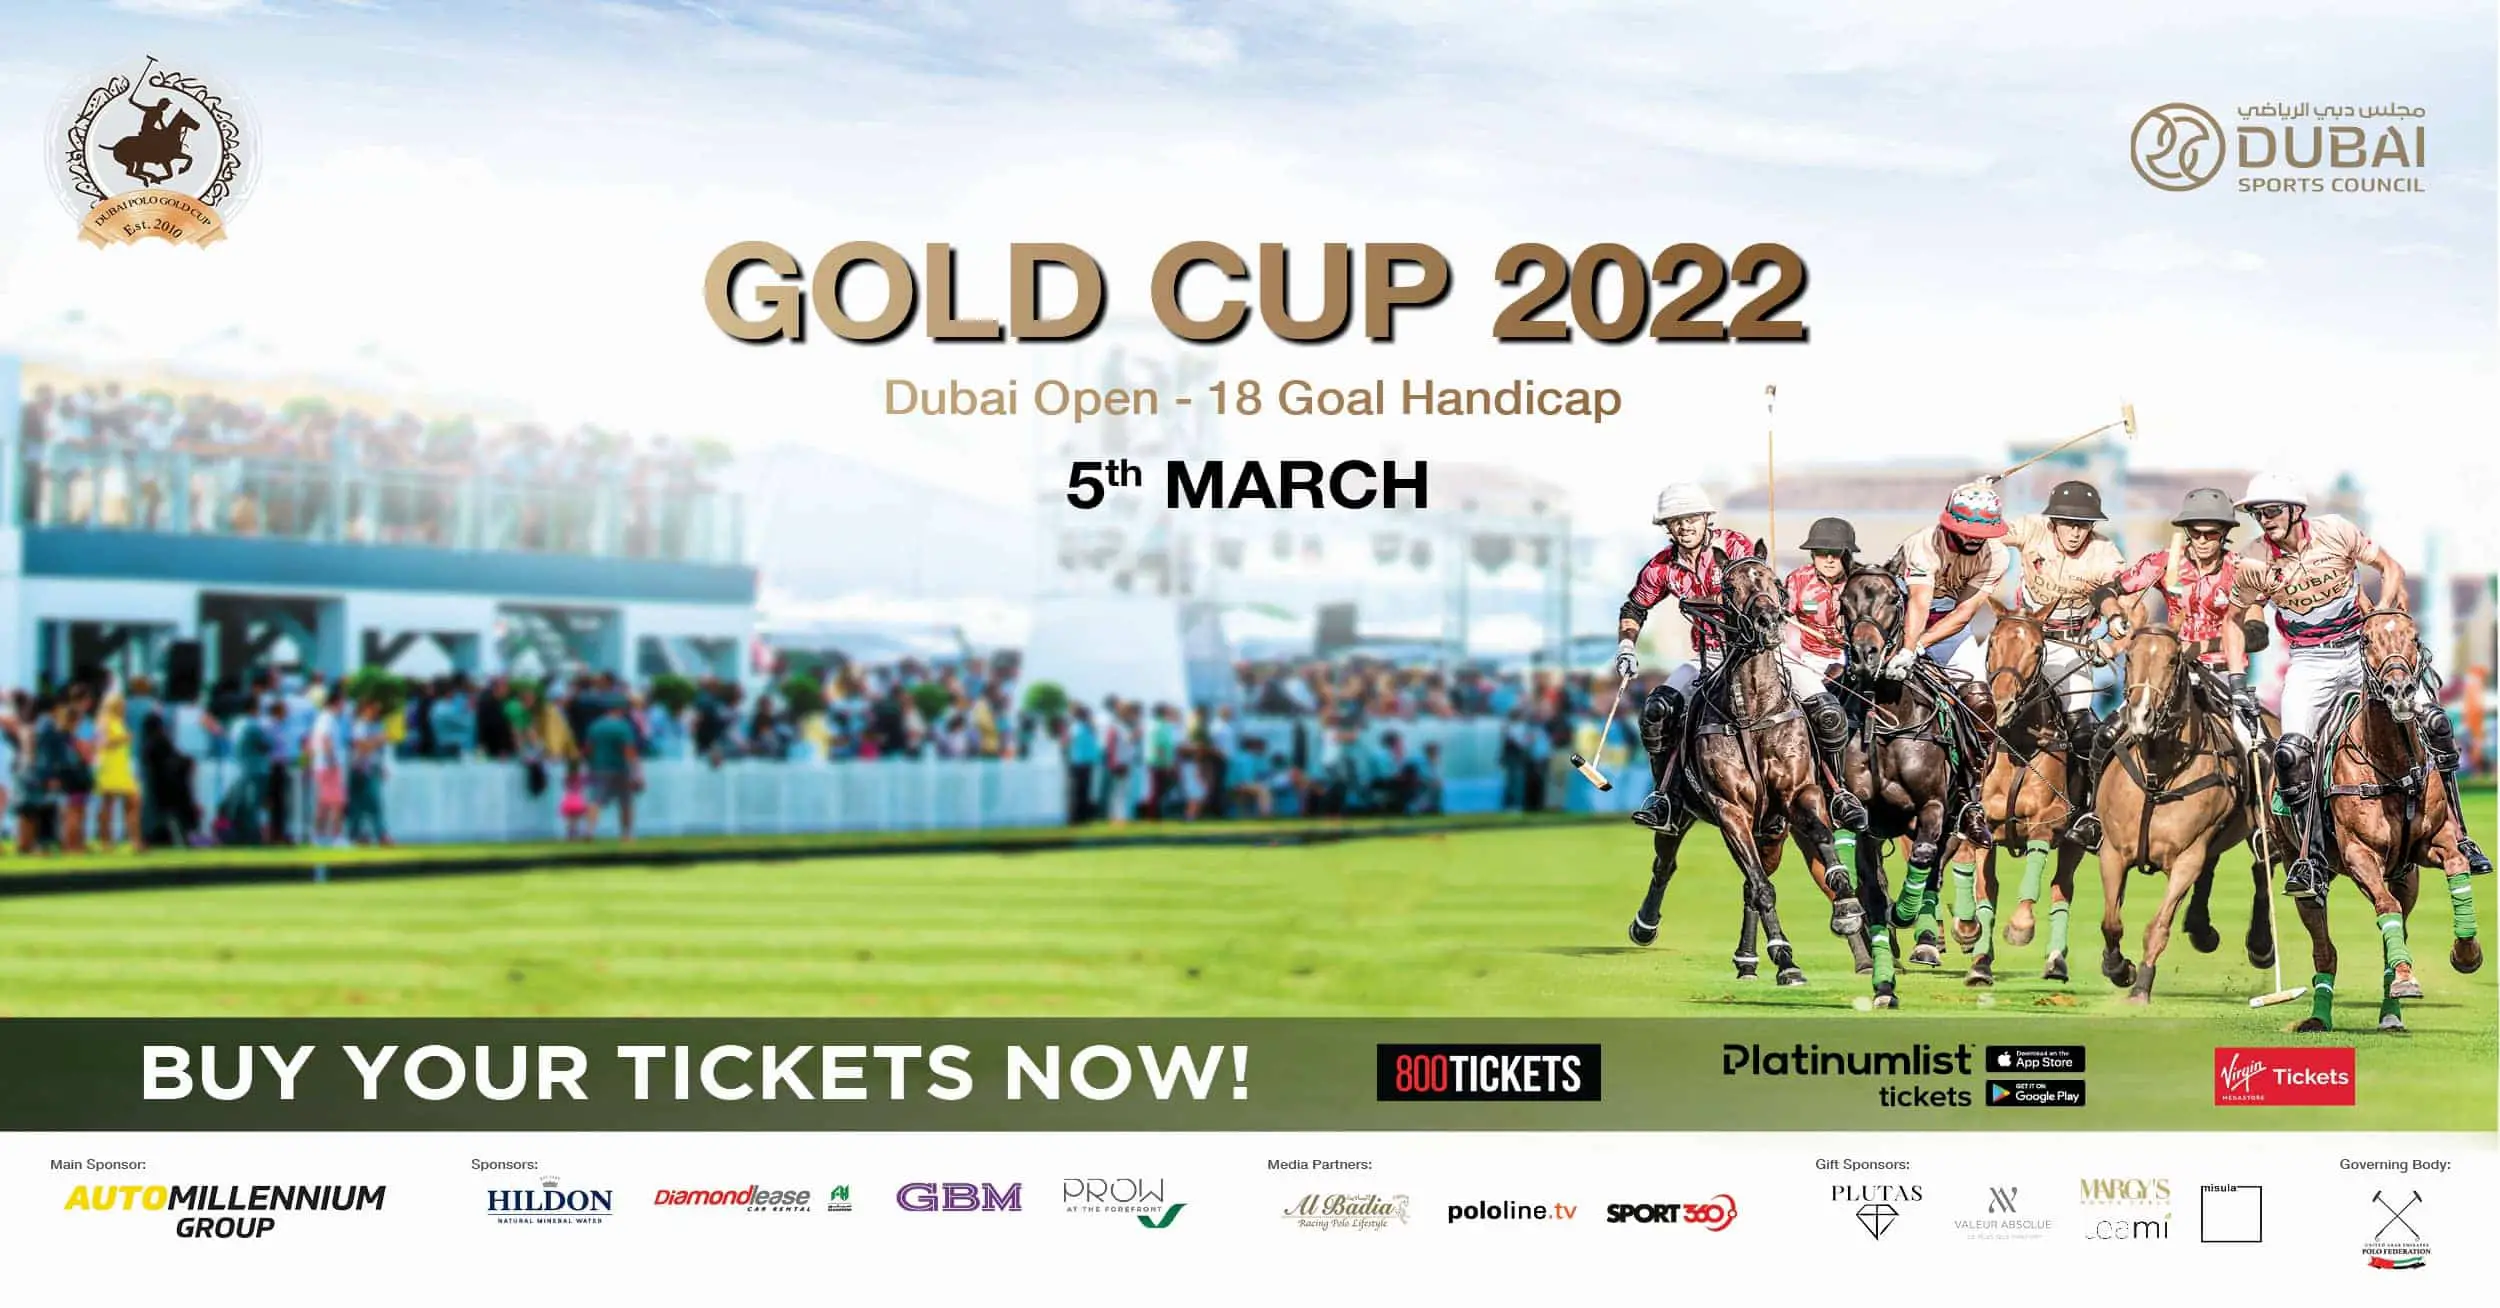 GOLD CUP 2022